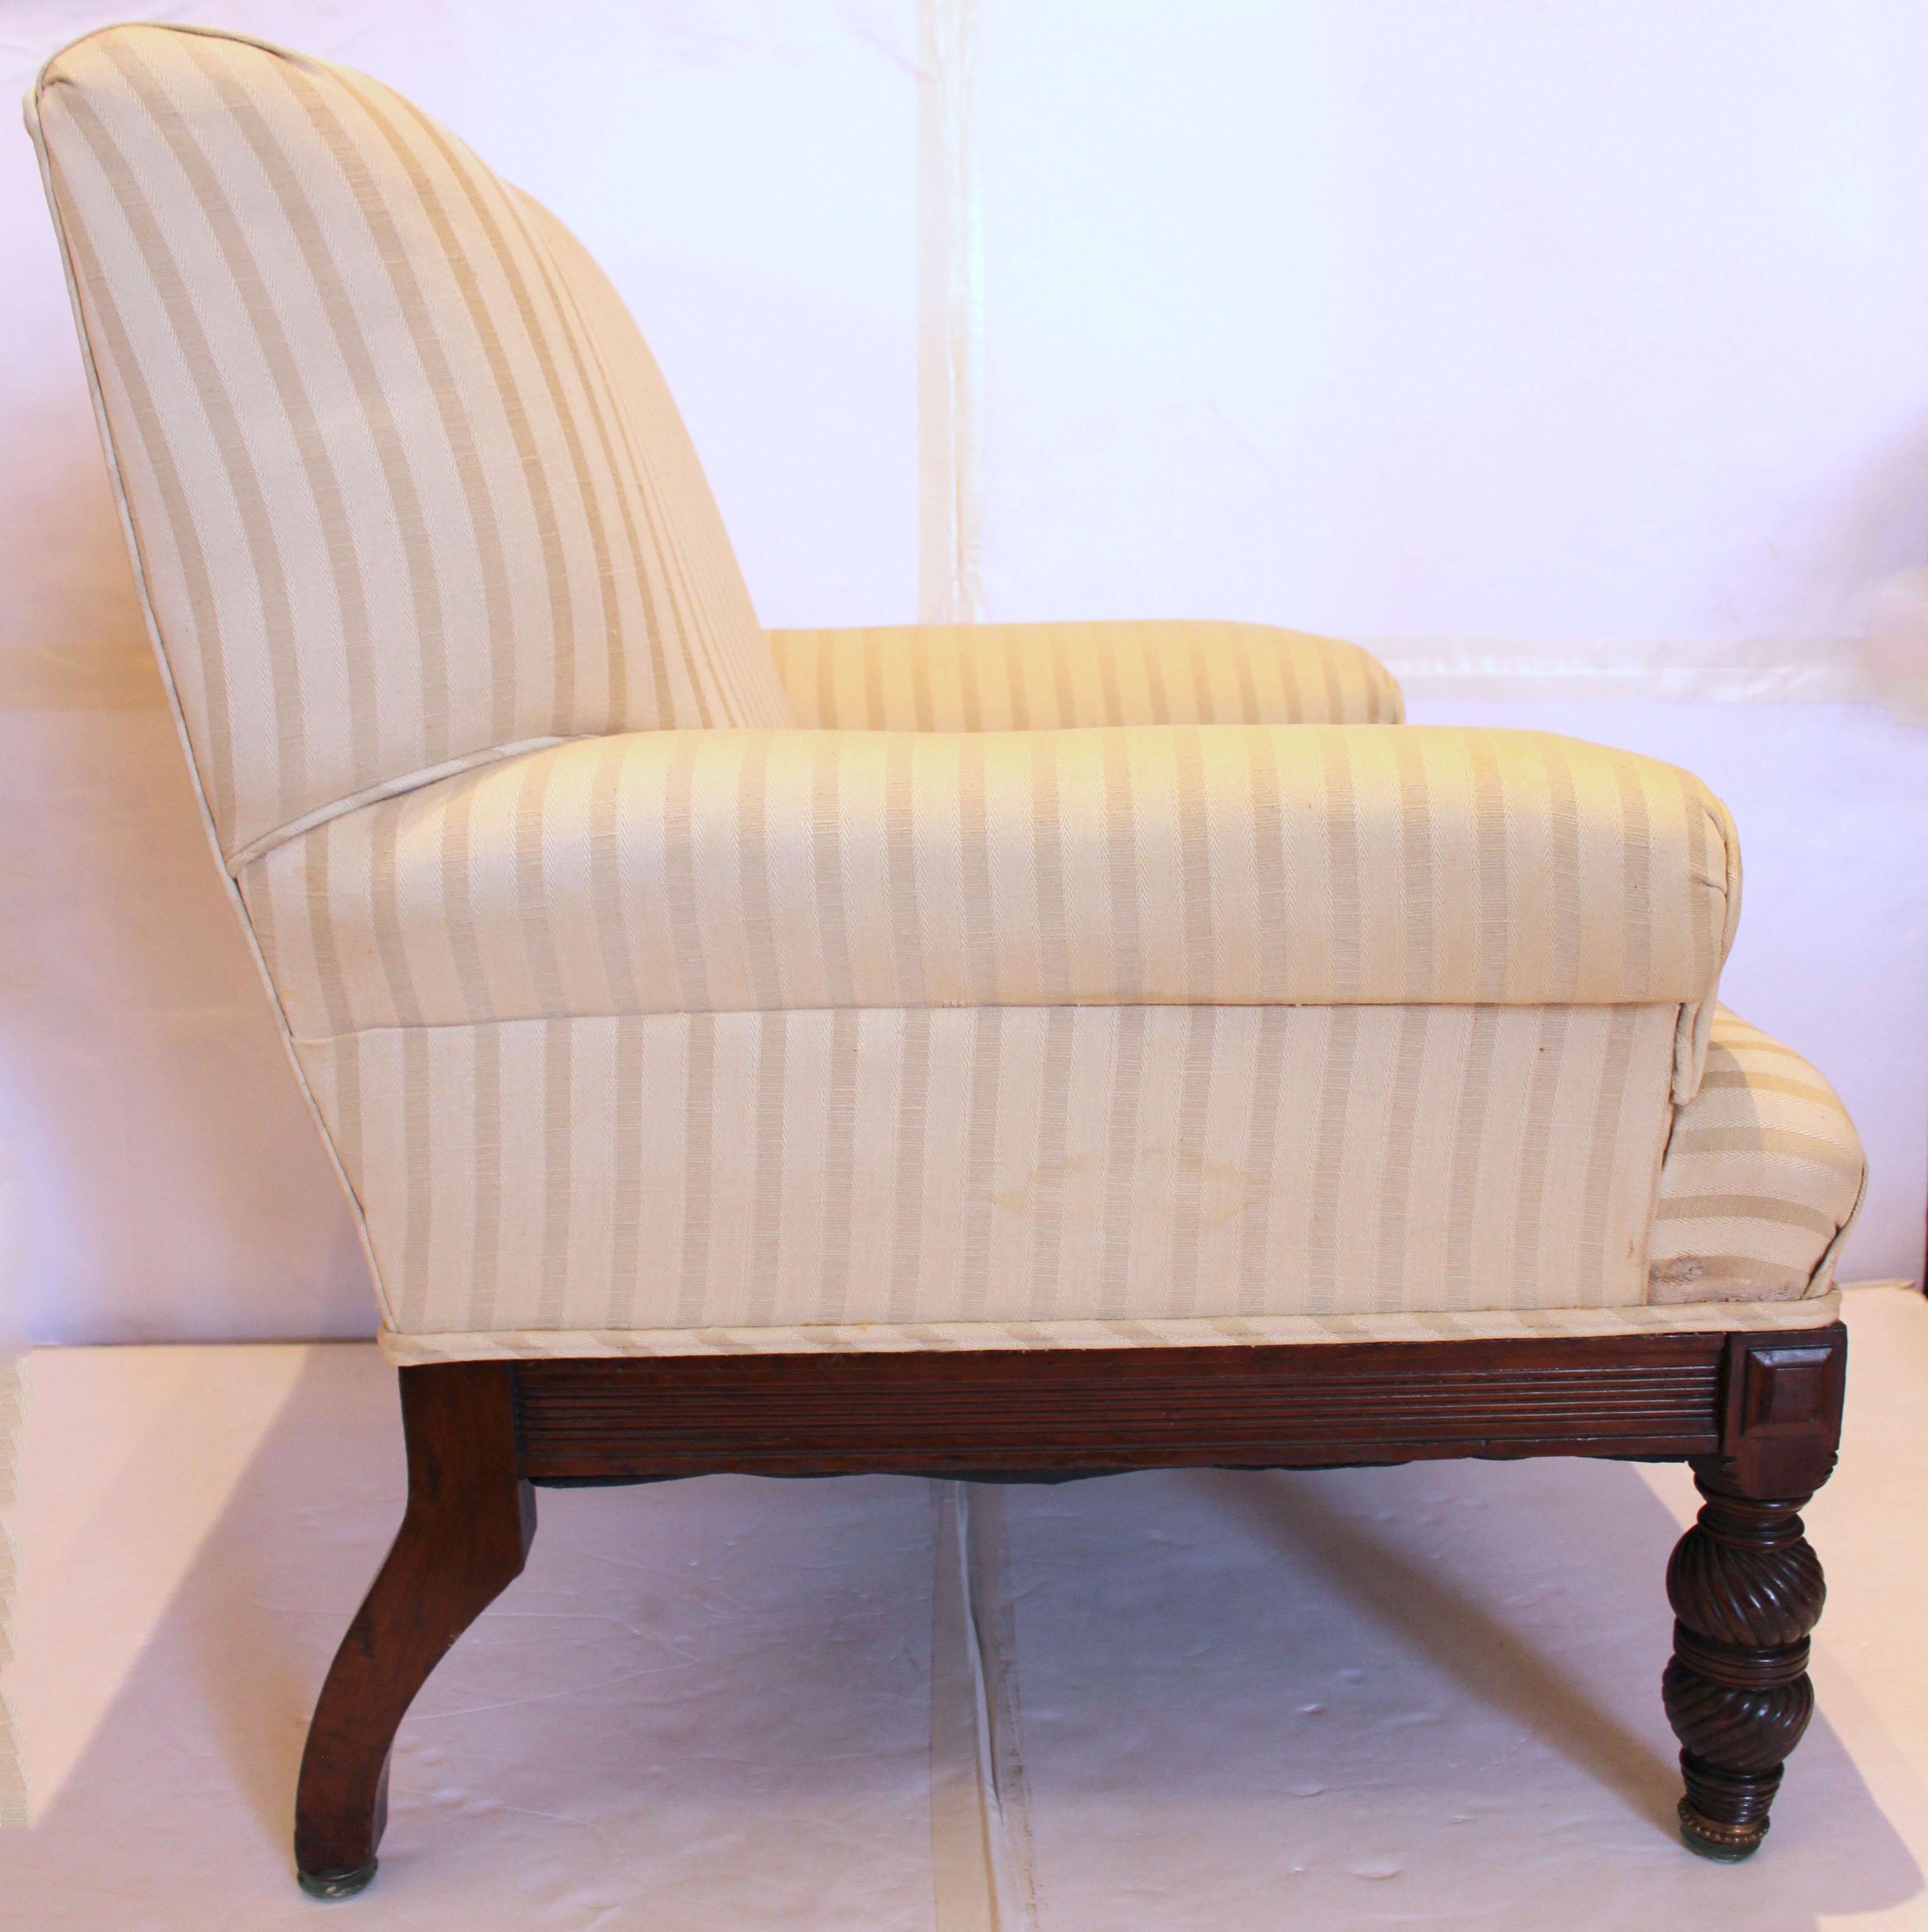 Circa 1820-30 George IV/Late Regency period library easy chair, English. Howard & Sons taste. Raised on swirl carved, turned front legs & arched rear legs. Reeded aprons. Brass caps. As found upholstery.
26.5